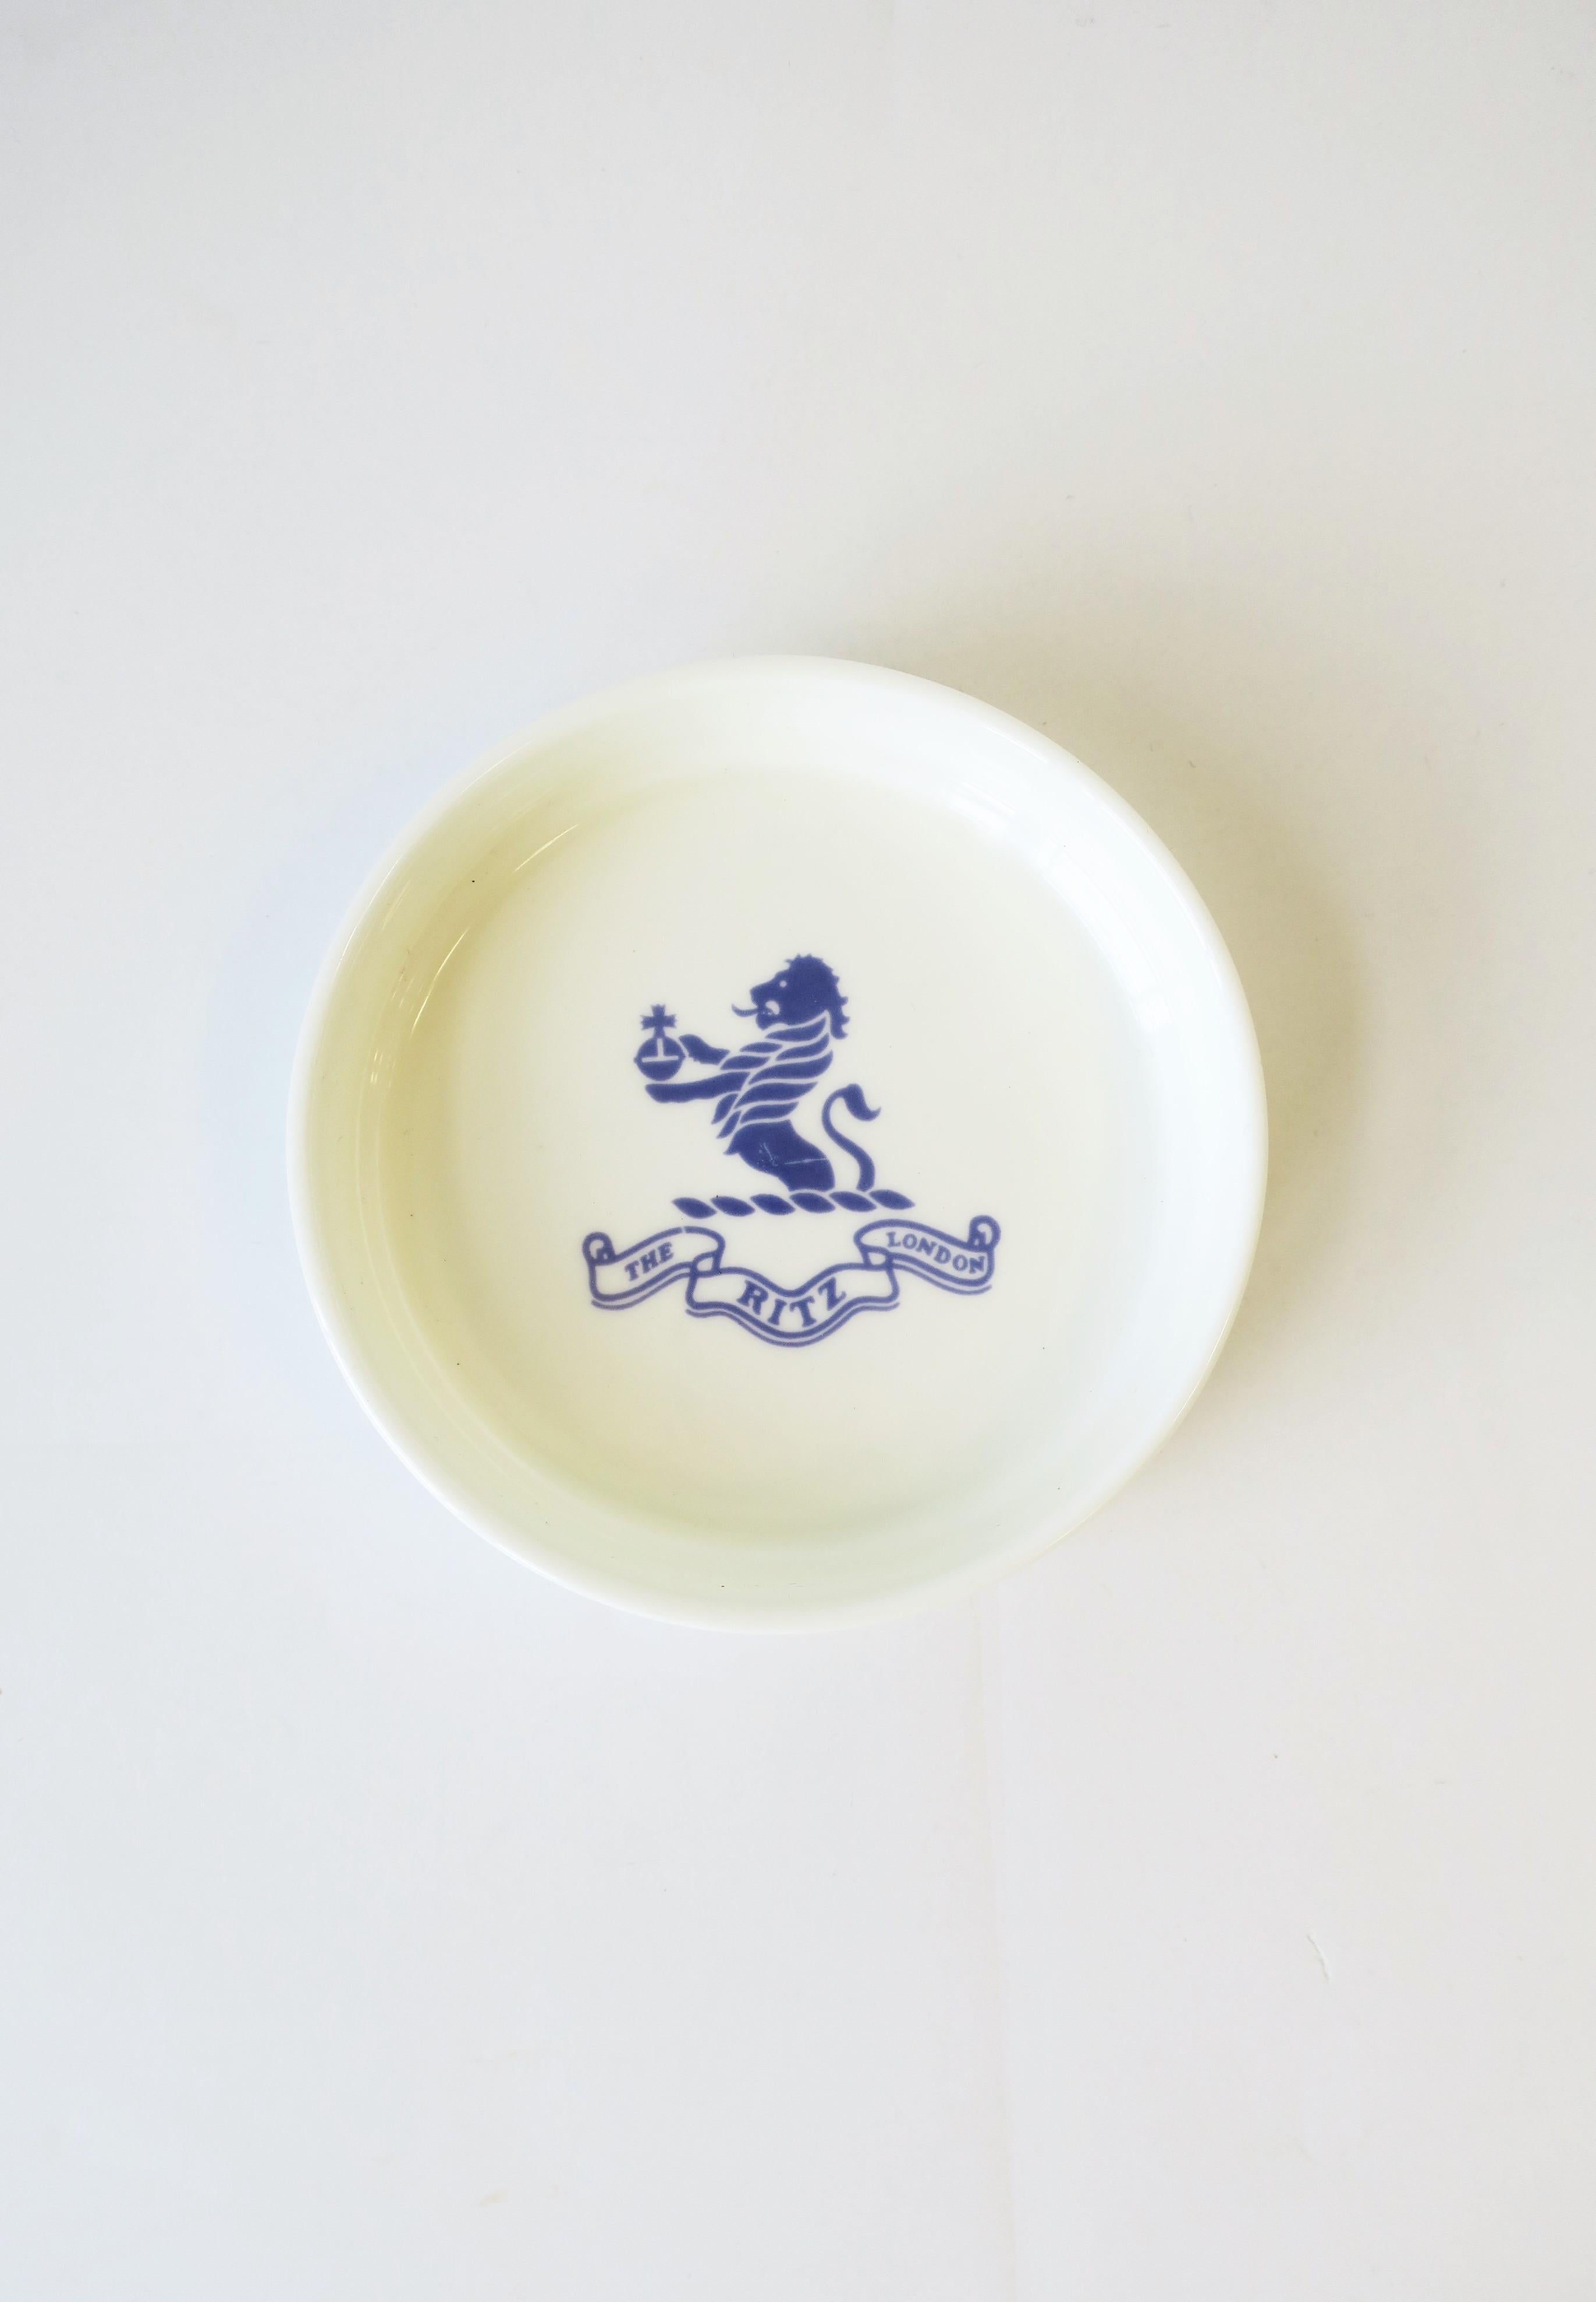 From 'The Ritz London' a round blue and white porcelain jewelry dish with Lion crest detail. A great catchall for jewelry or other small items for desk, vanity, nightstand area, etc. Piece is fine bone-china porcelain made by Royal Doulton, England,